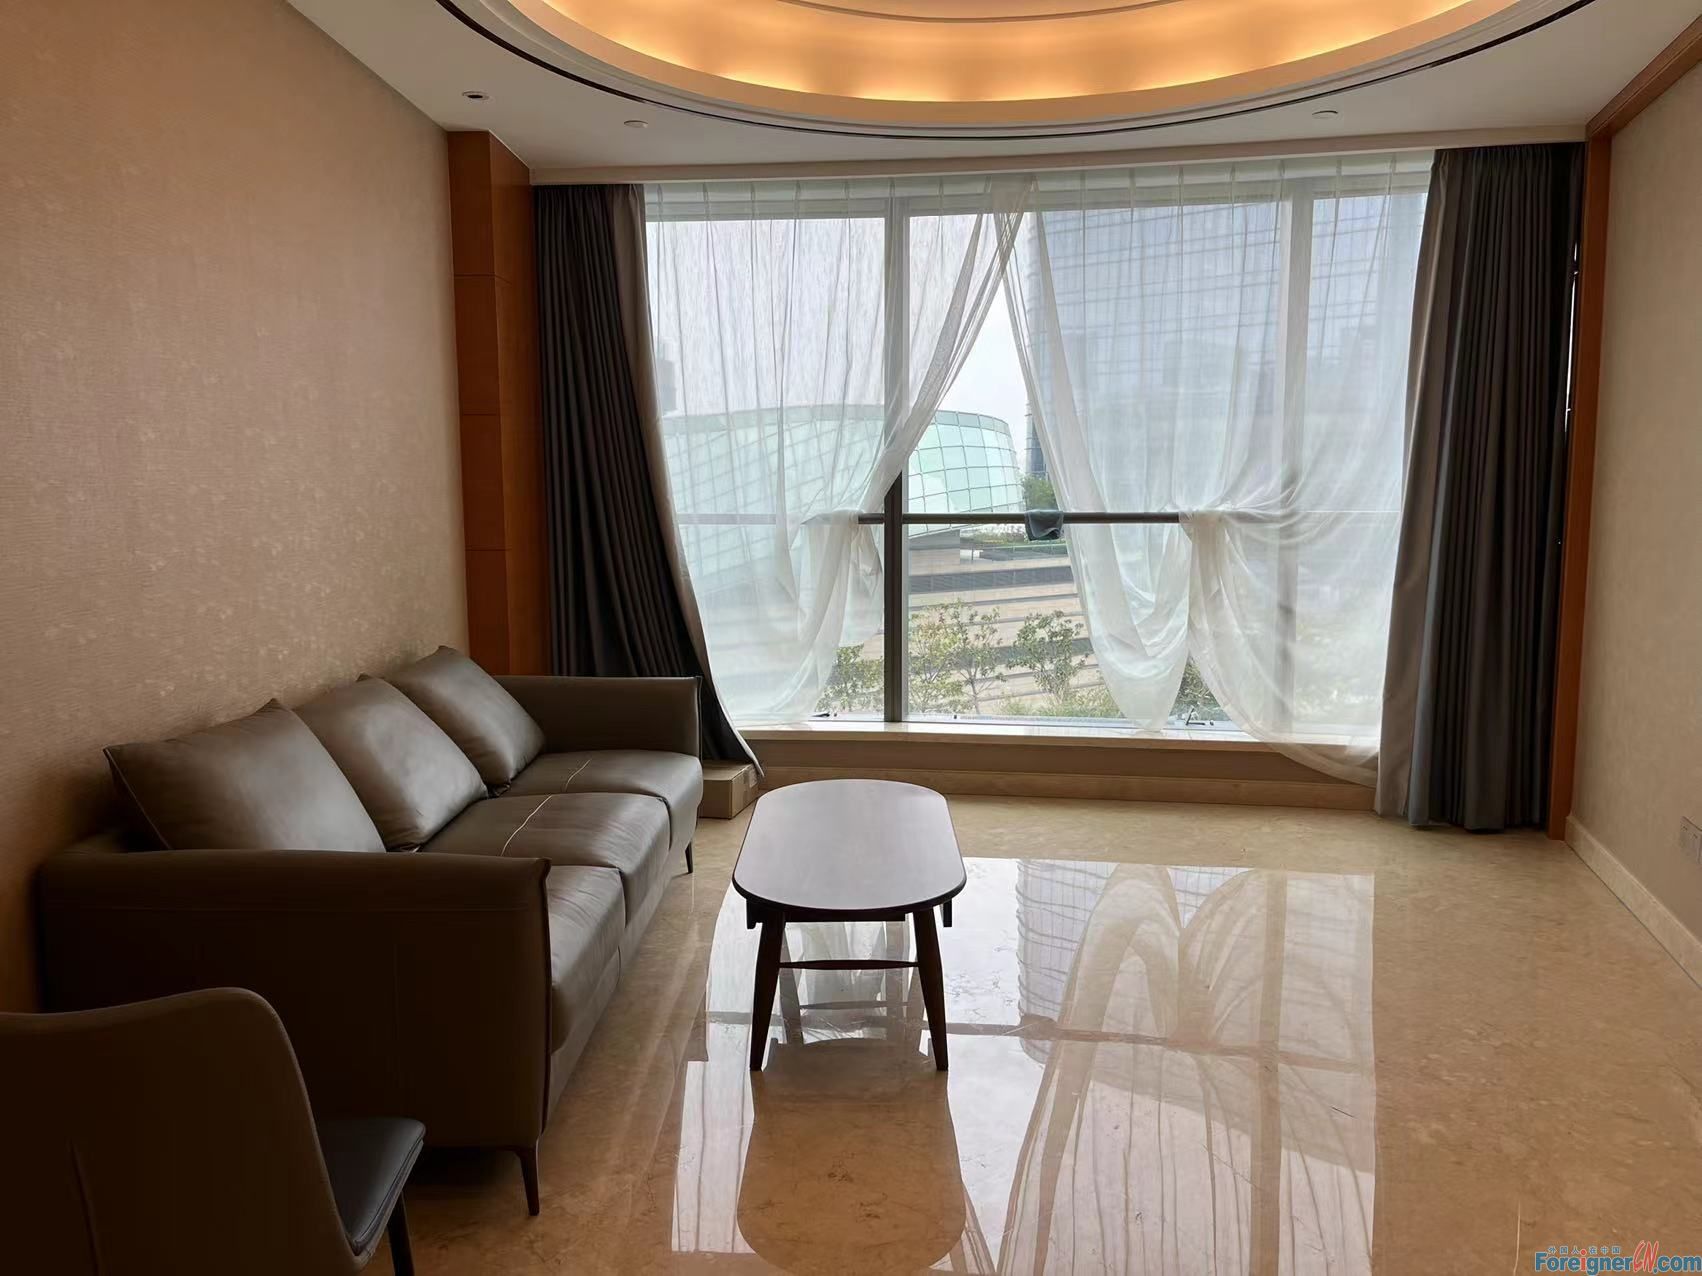 Stunning!! Suzhou Center No.9 apartment in SIP/2 bedrooms and 2 bathroom/Central AC、floor heating/close to Suzhou Center shopping mall/ Xinghai Square mall/Station nearby